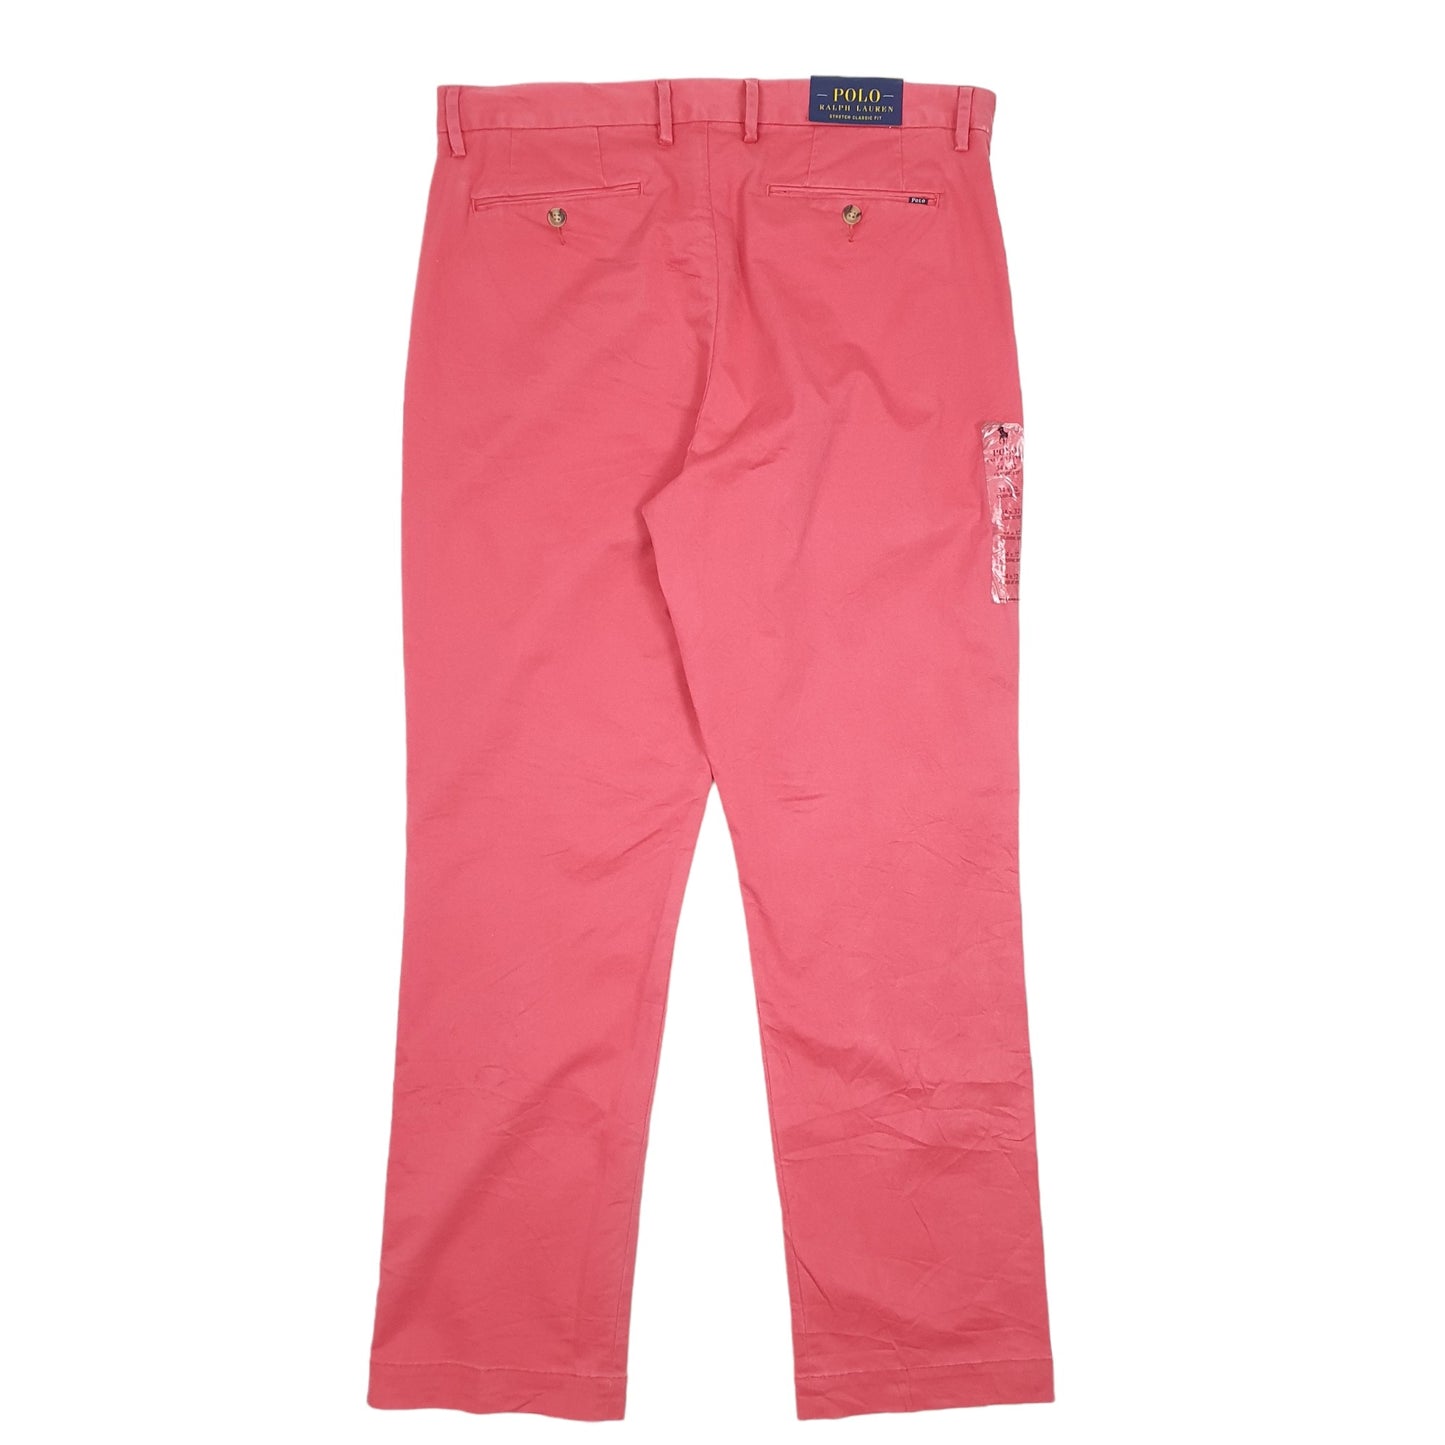 Mens Pink Polo Ralph Lauren Stretch Classic Chino Trousers